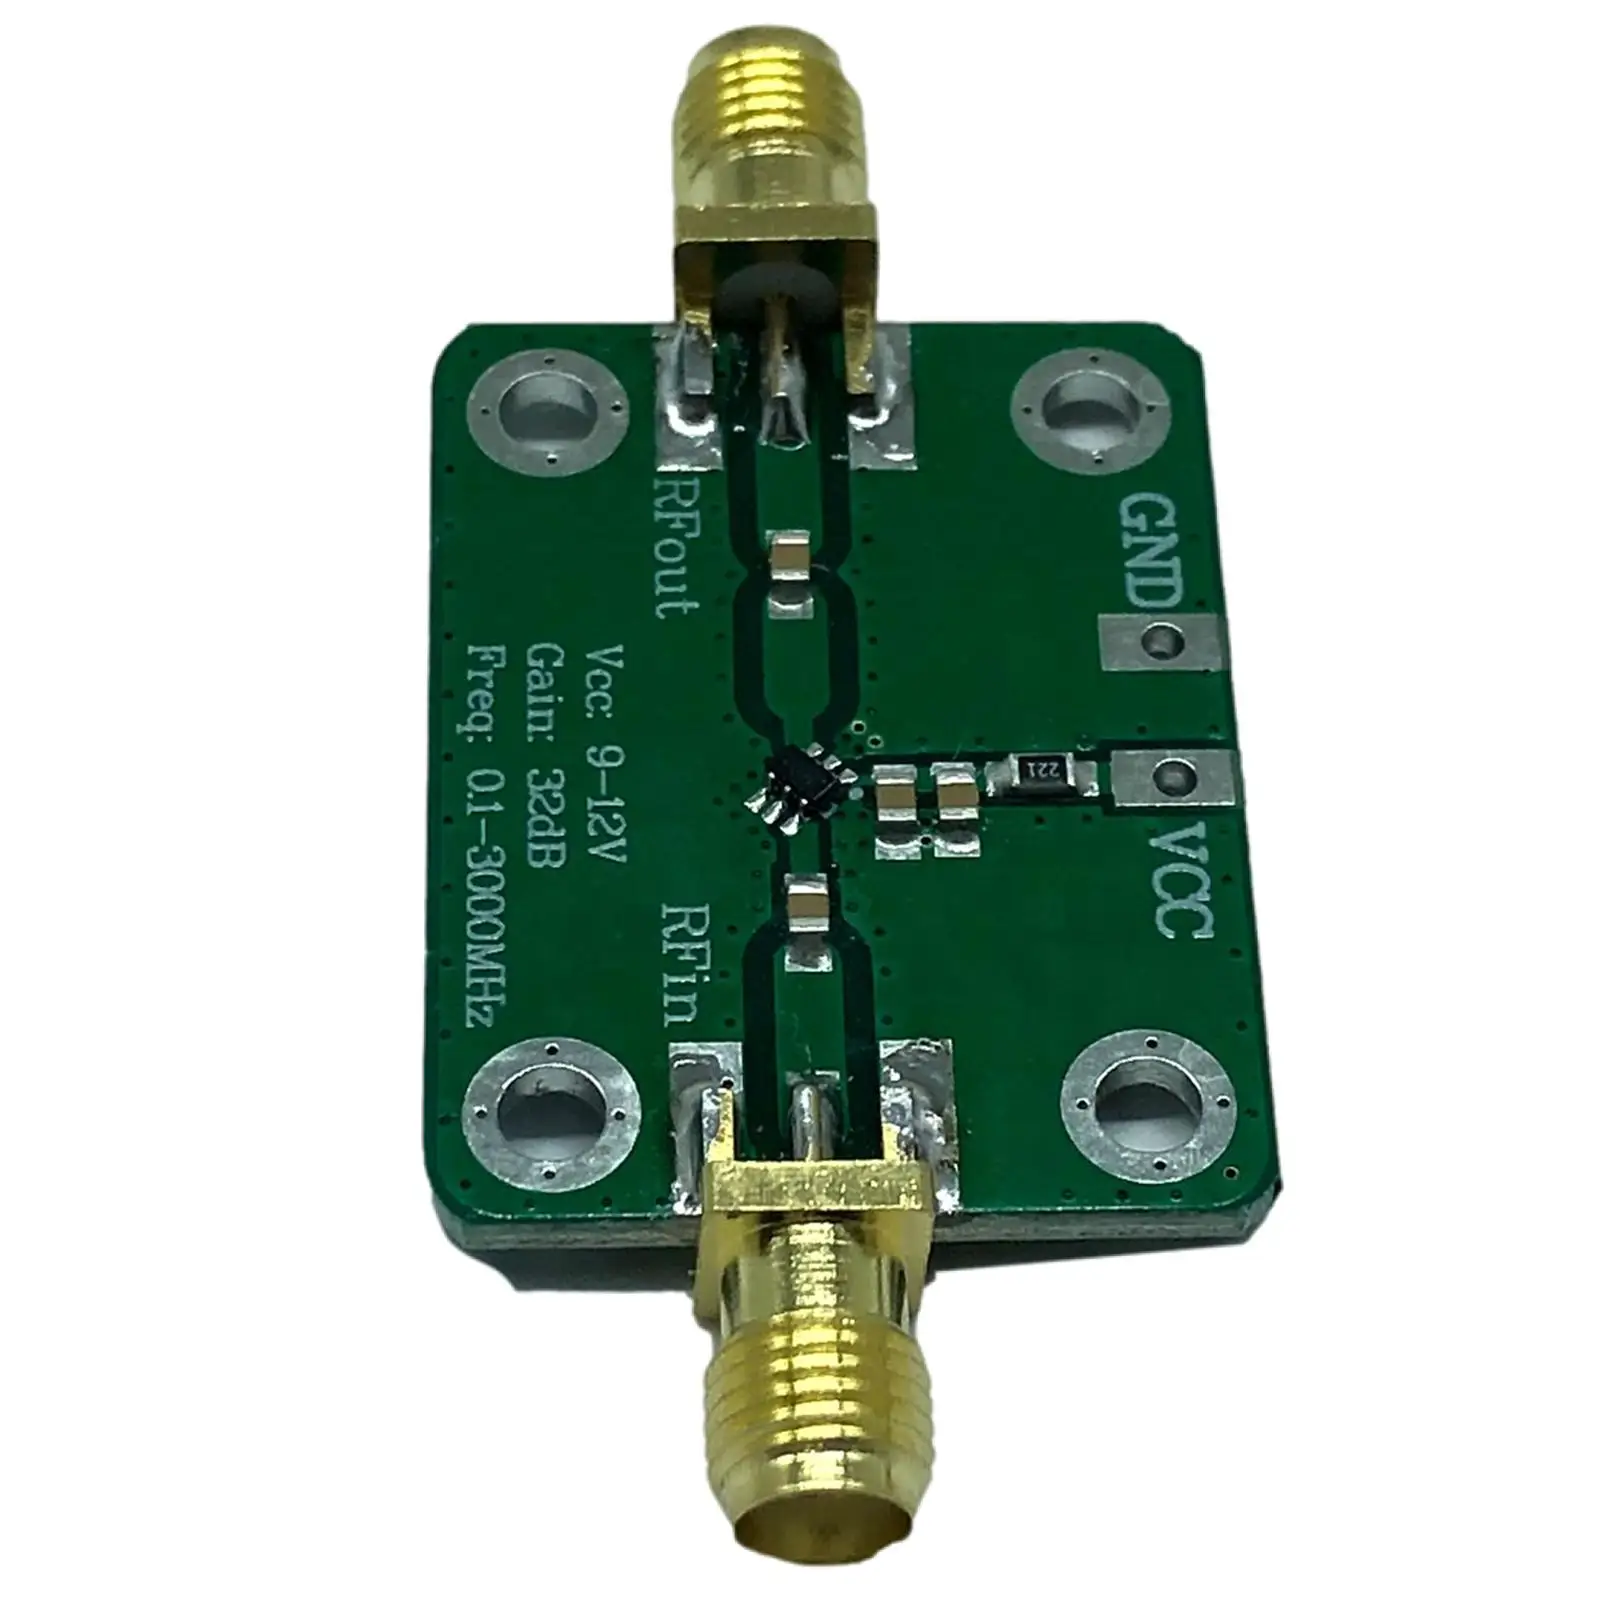 Broadband Amplifier Module Wide Use Signal Receiver  Noise  Radio Frequency 0.1-3000MHz LNA